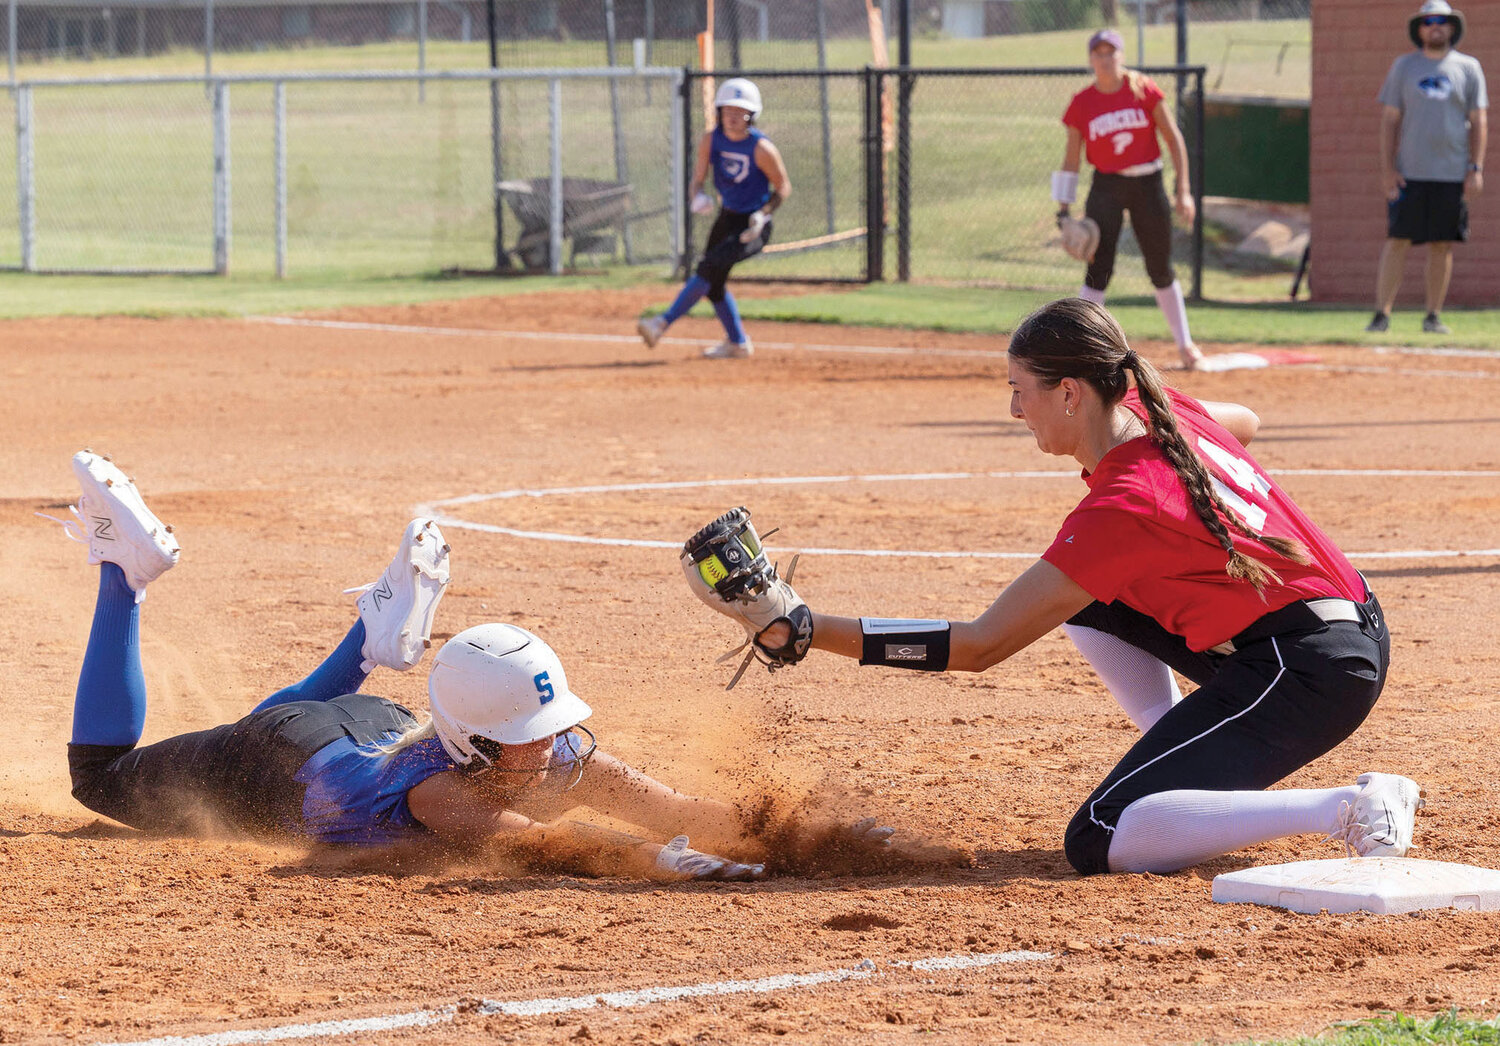 Purcell junior Ella Resendiz slaps a tag on a Stroud base runner Monday during a pre-season scrimmage. The Dragons are set to play Sulphur on Aug. 14. in their home opener.